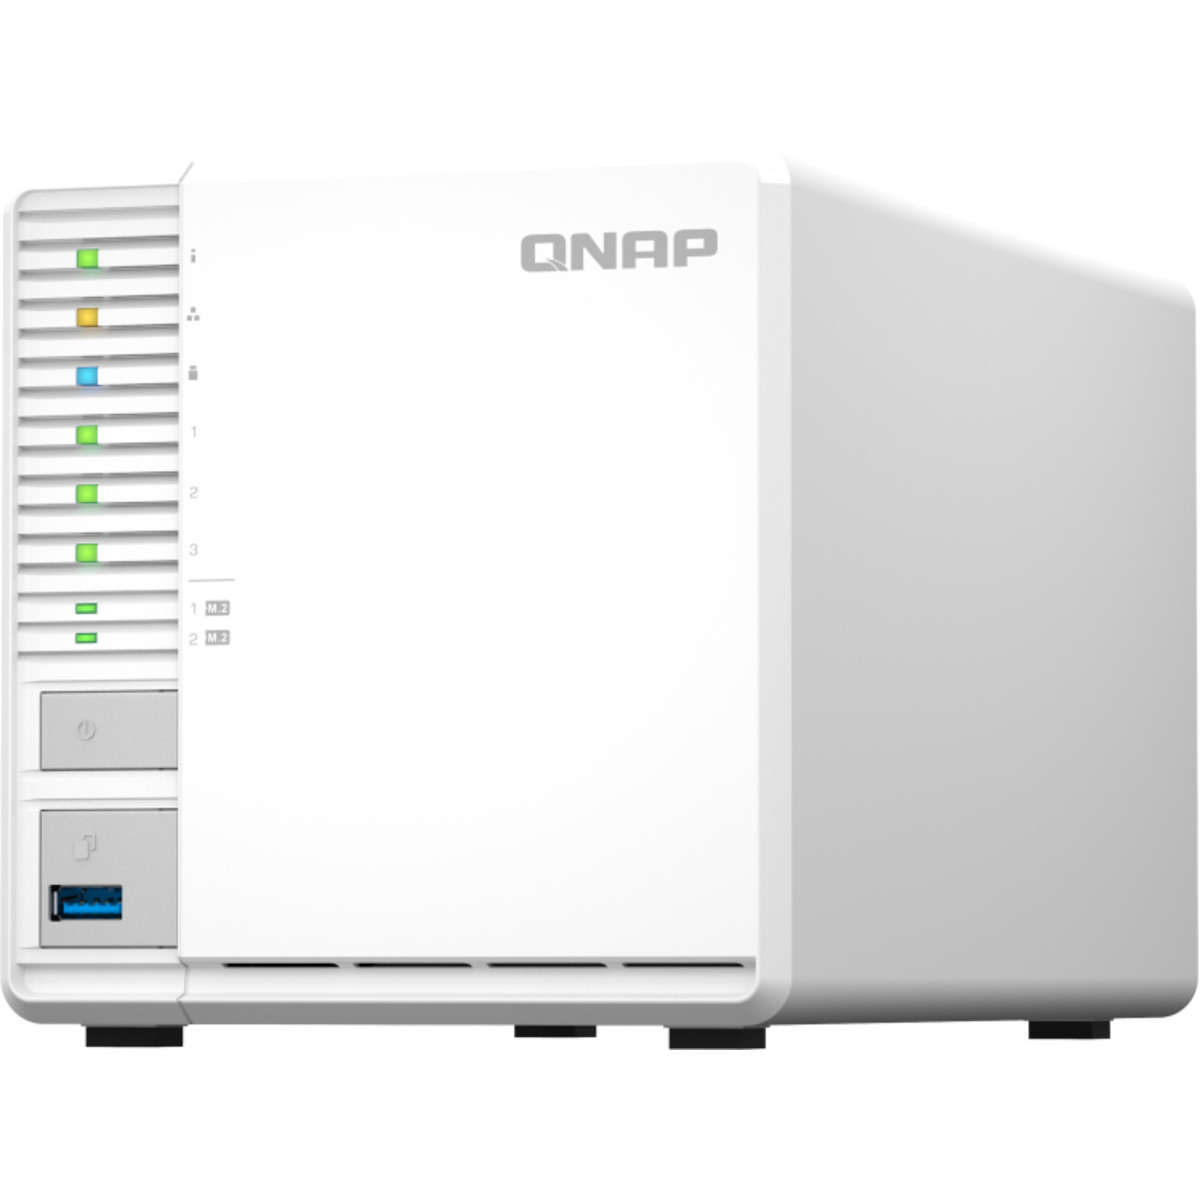 QNAP TS-364 6tb 3-Bay Desktop Multimedia / Power User / Business NAS - Network Attached Storage Device 3x2tb Crucial MX500 CT2000MX500SSD1 2.5 560/510MB/s SATA 6Gb/s SSD CONSUMER Class Drives Installed - Burn-In Tested TS-364